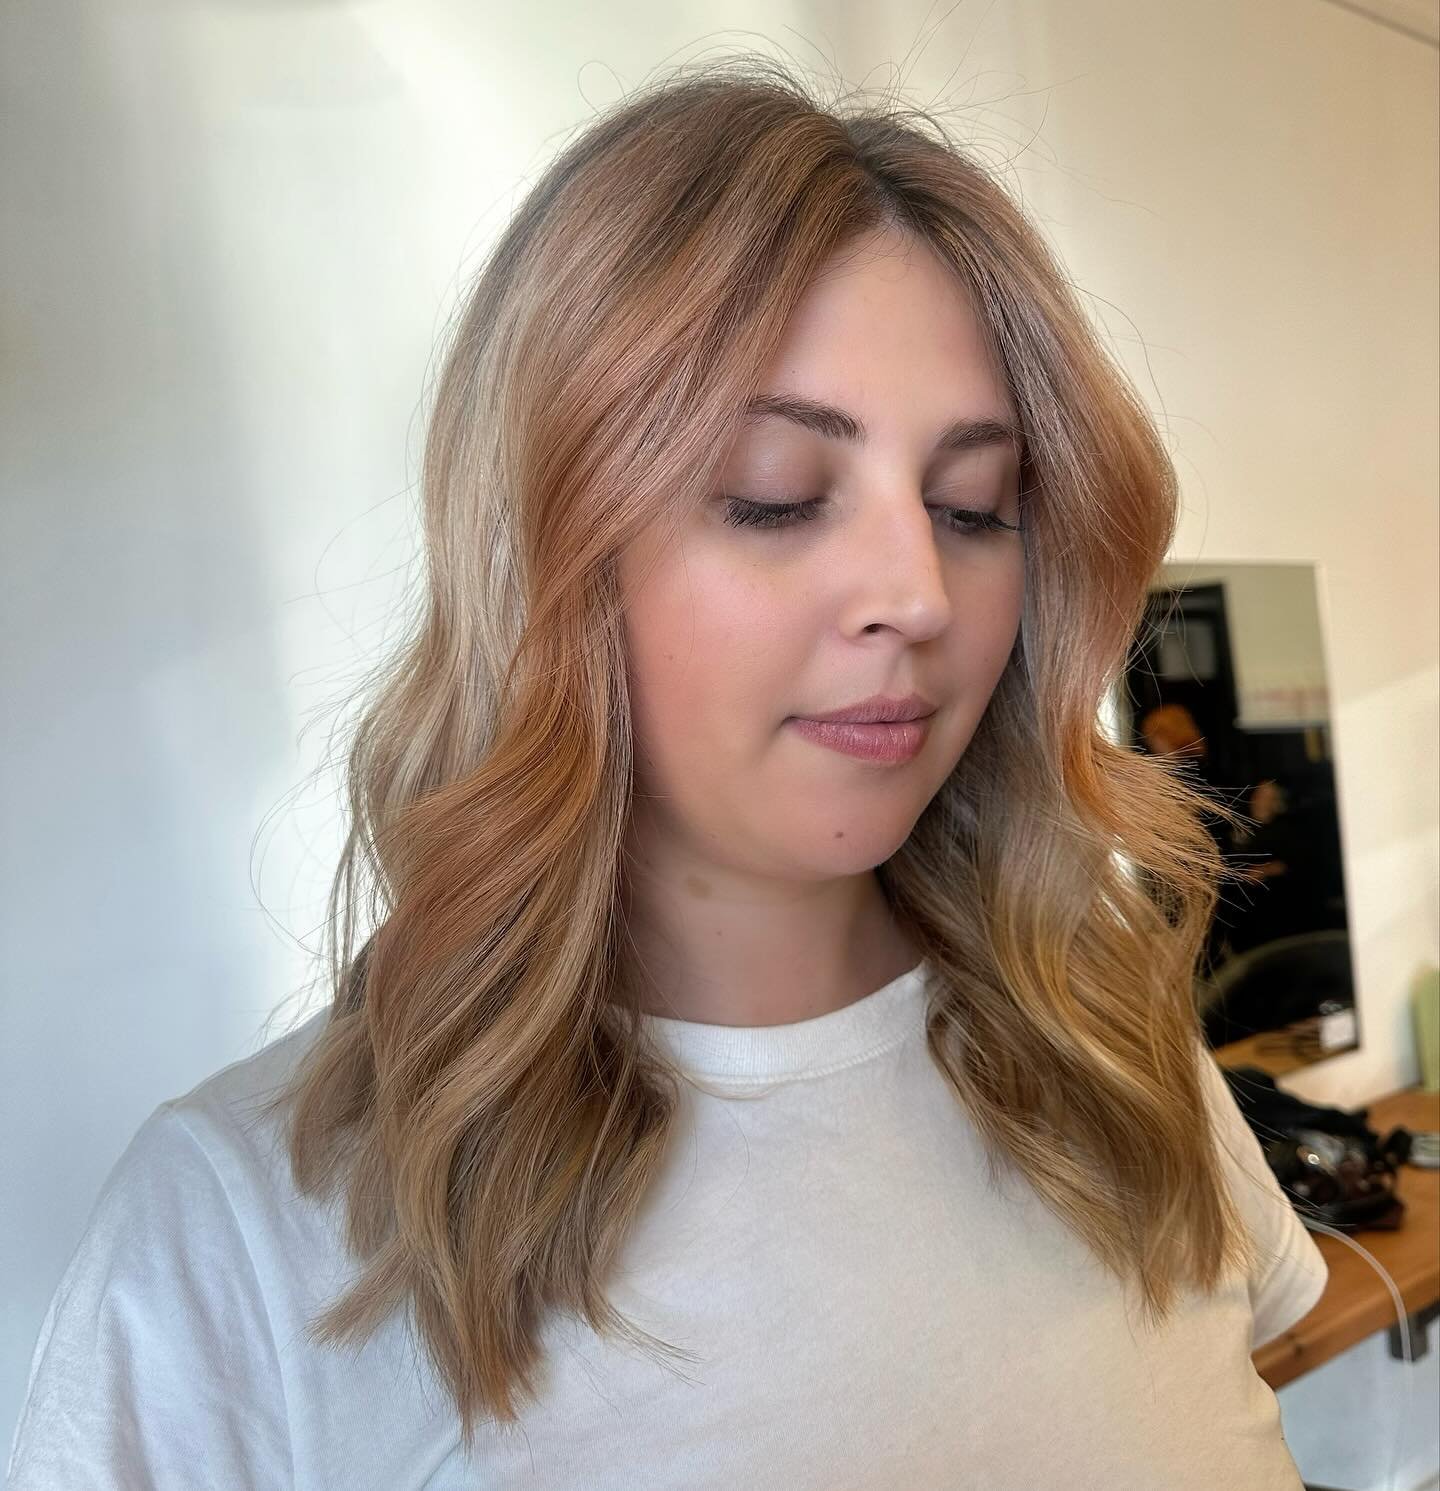 Peachy blonde!!🧡🍑

We love how we can use the @milkshakehair_aus colour whipped creams to create the nicest blonde effects.

On this beautiful queen we used the rose brown that gives the cutest peachy effect.
Hope you guys are enjoying this new bra